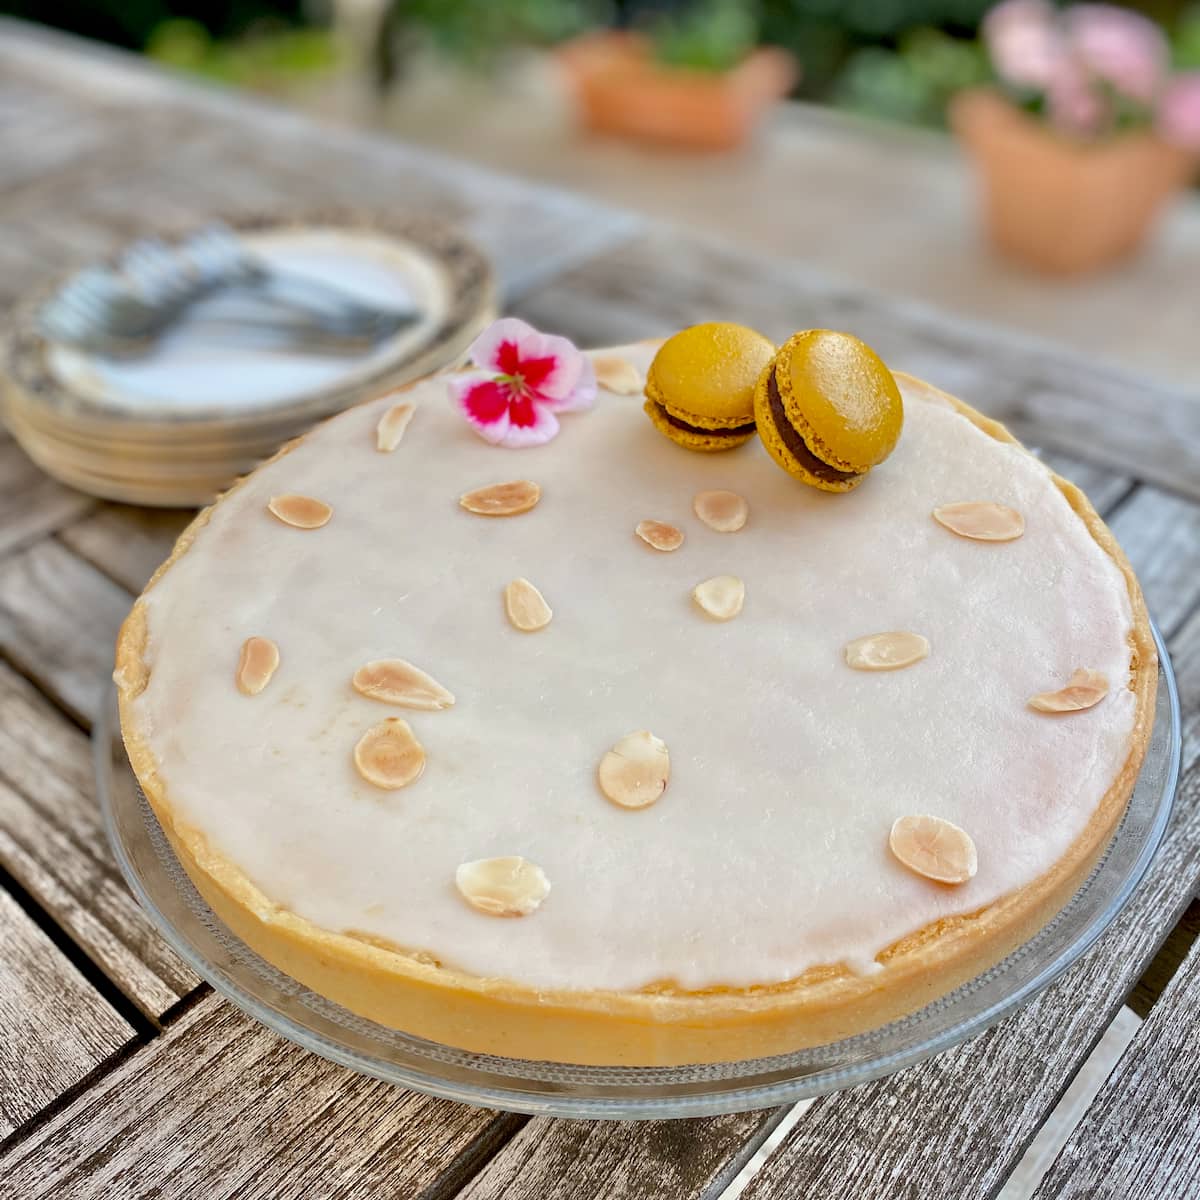 glazed round almond tart topped with toasted slivered almonds, a flower and French macarons